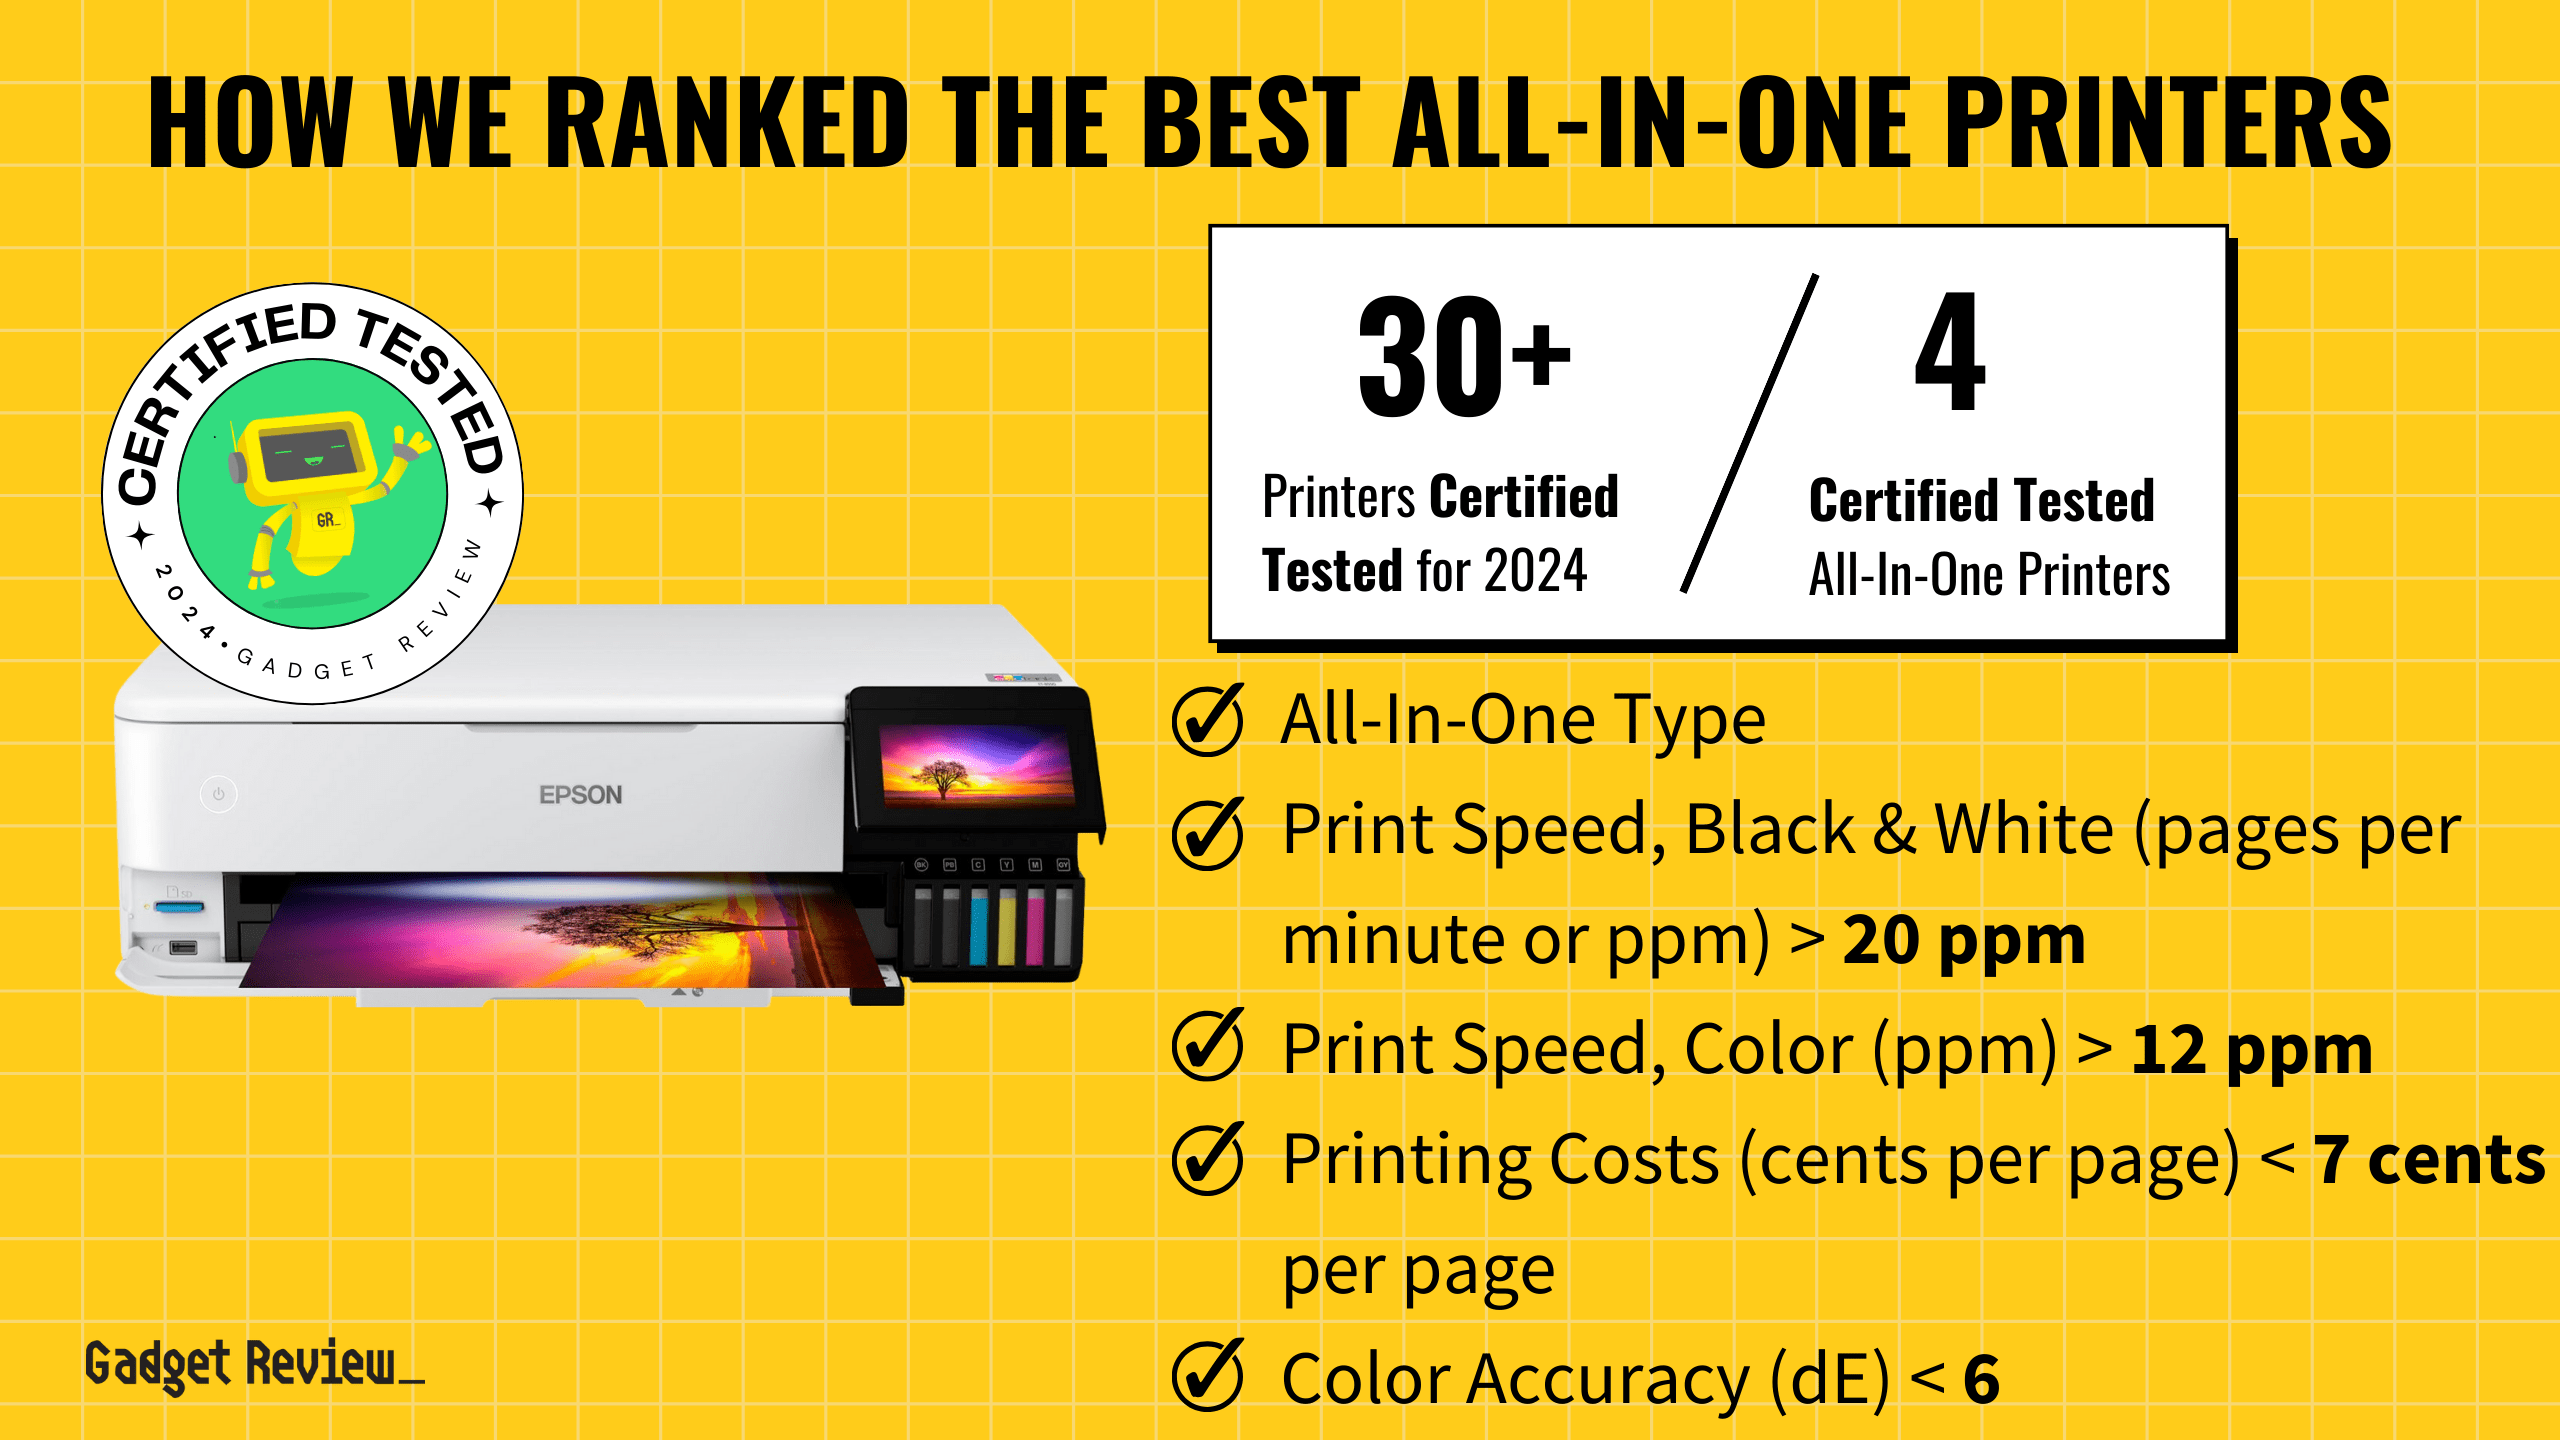 We Ranked the 4 Best All-In-One Printers